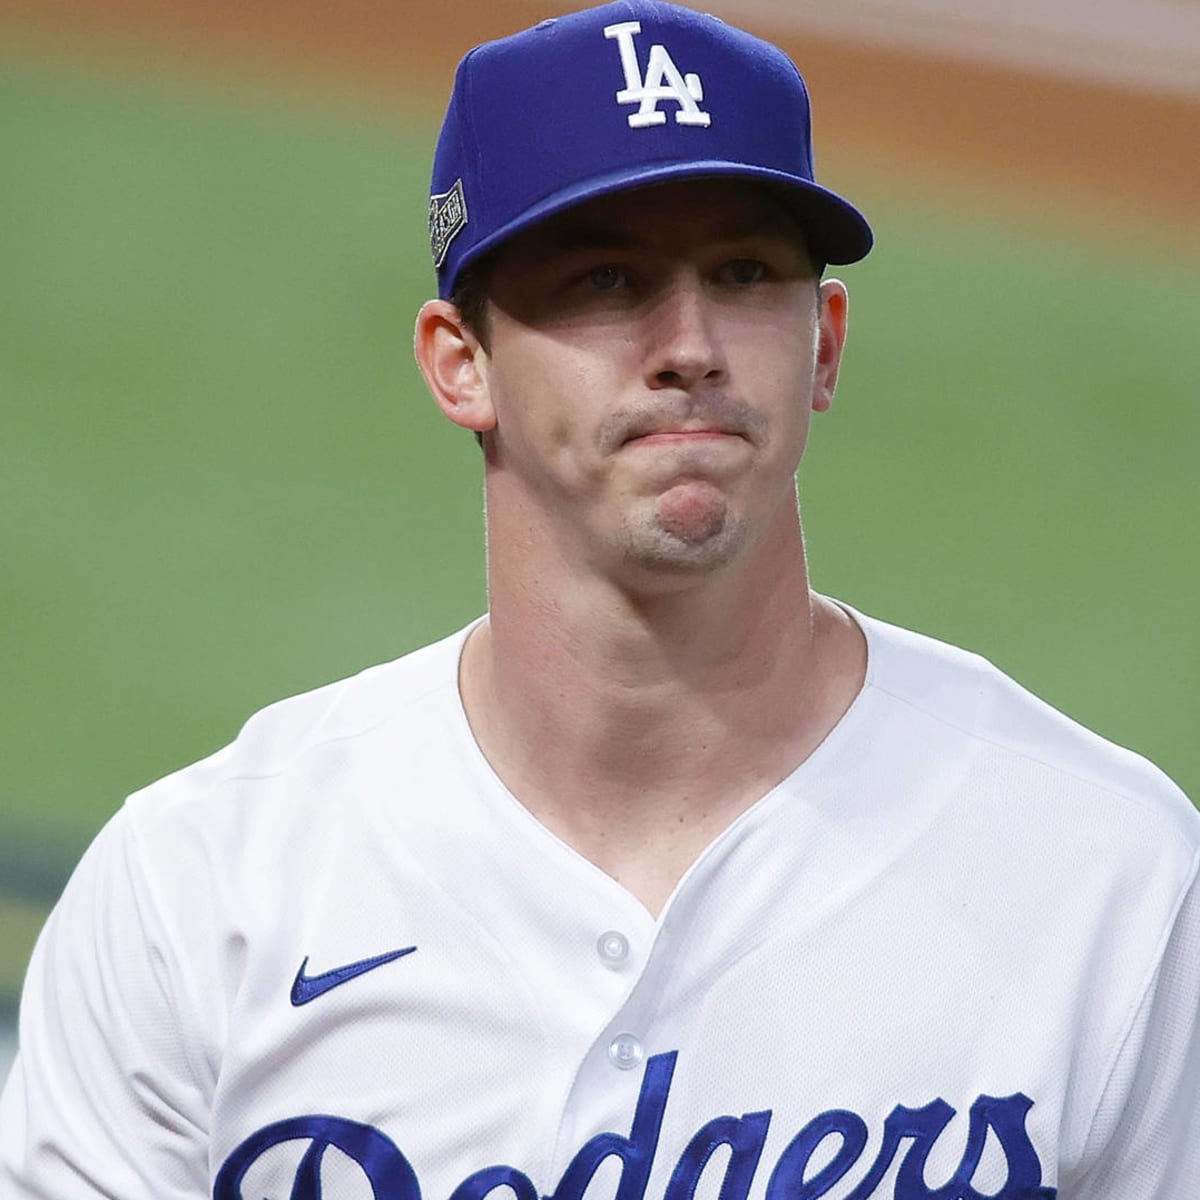 Walker Buehler was in no mood to discuss his tight pants